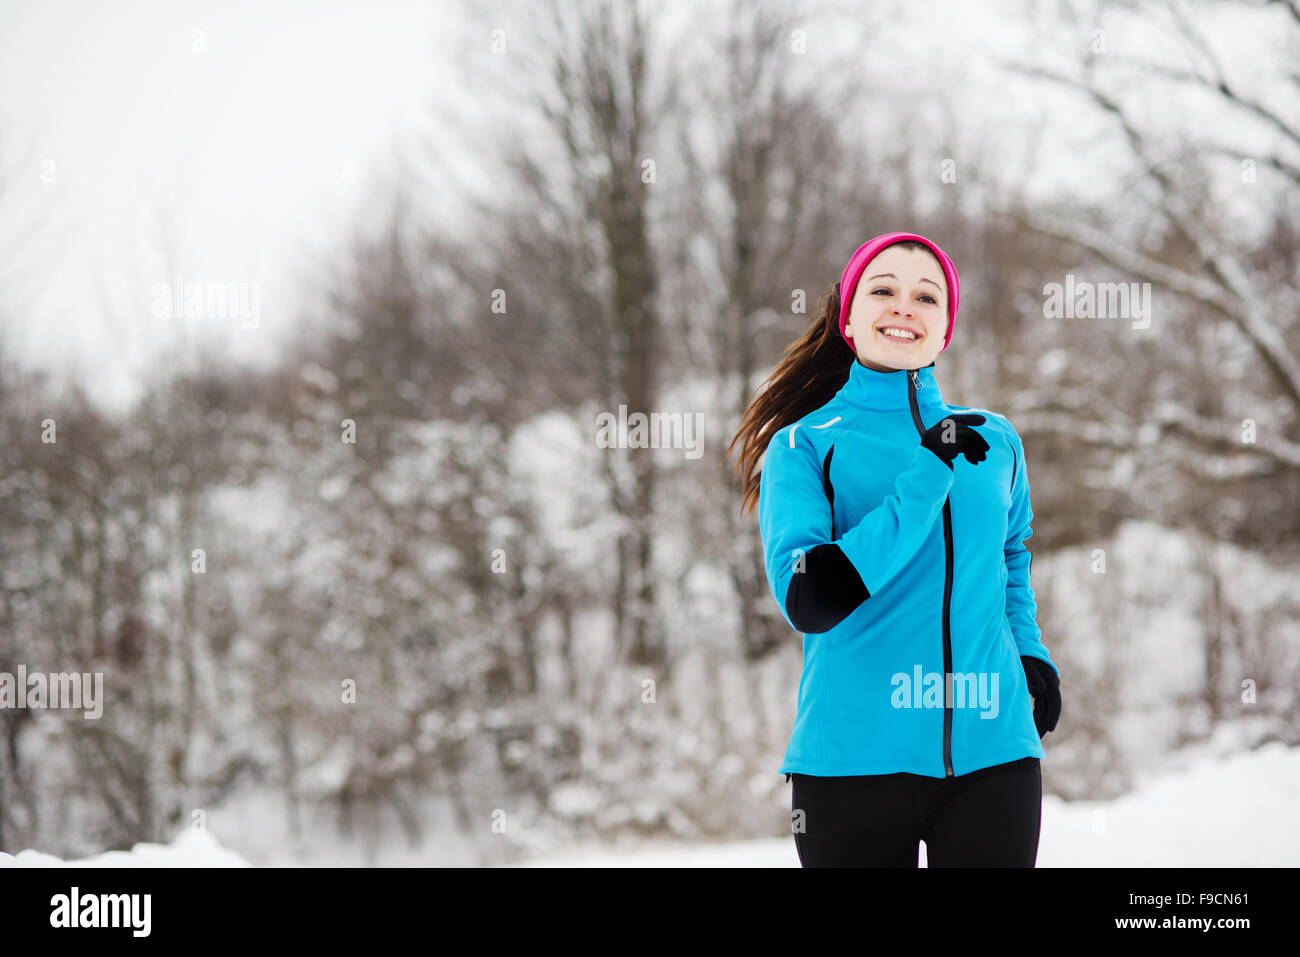 Athlete woman is running during winter training outside in cold snow weather. Stock Photo